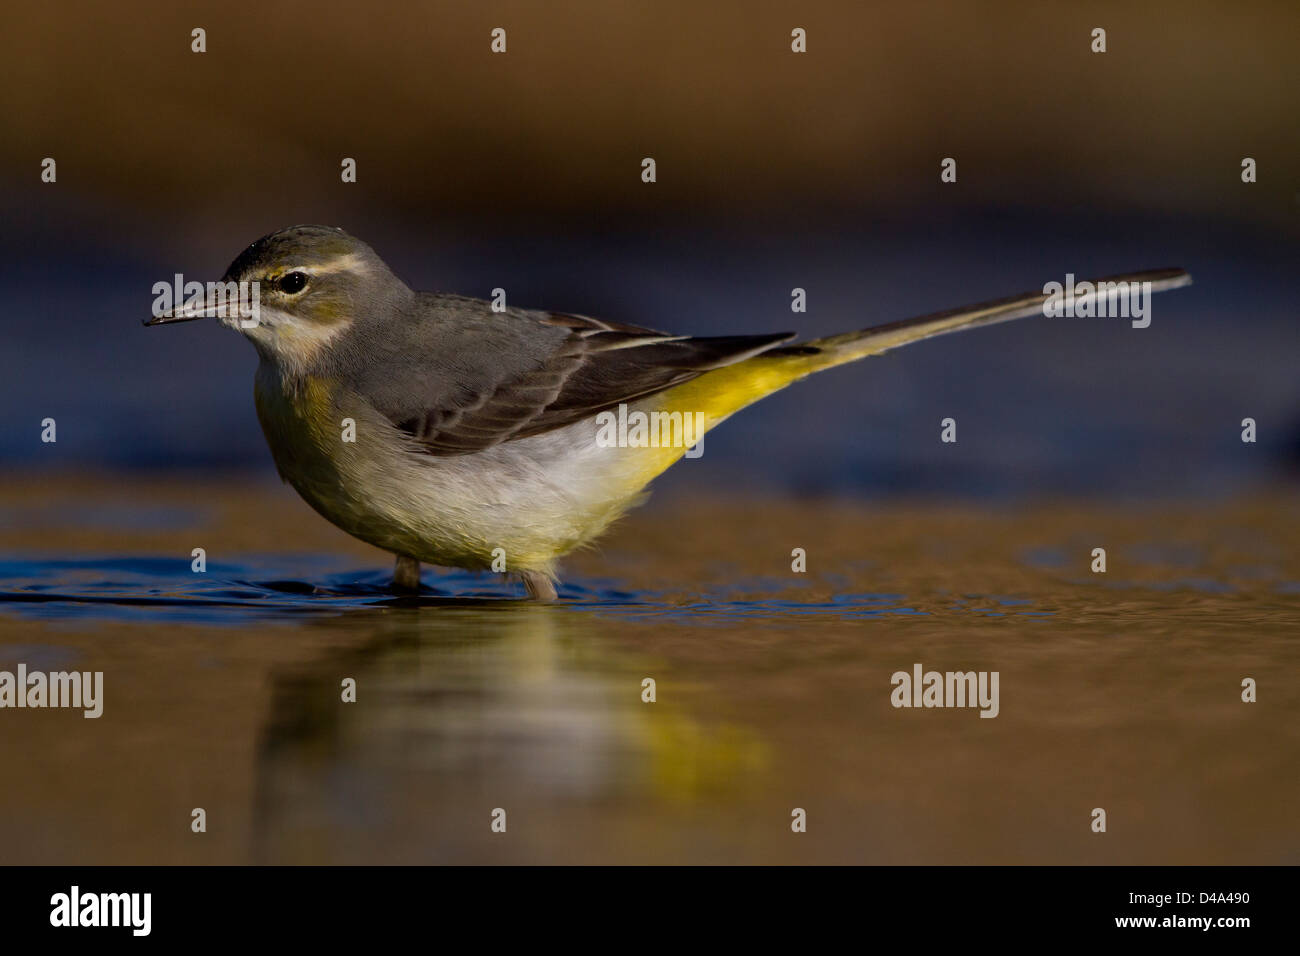 A grey wagtail in the water at sunrise Stock Photo